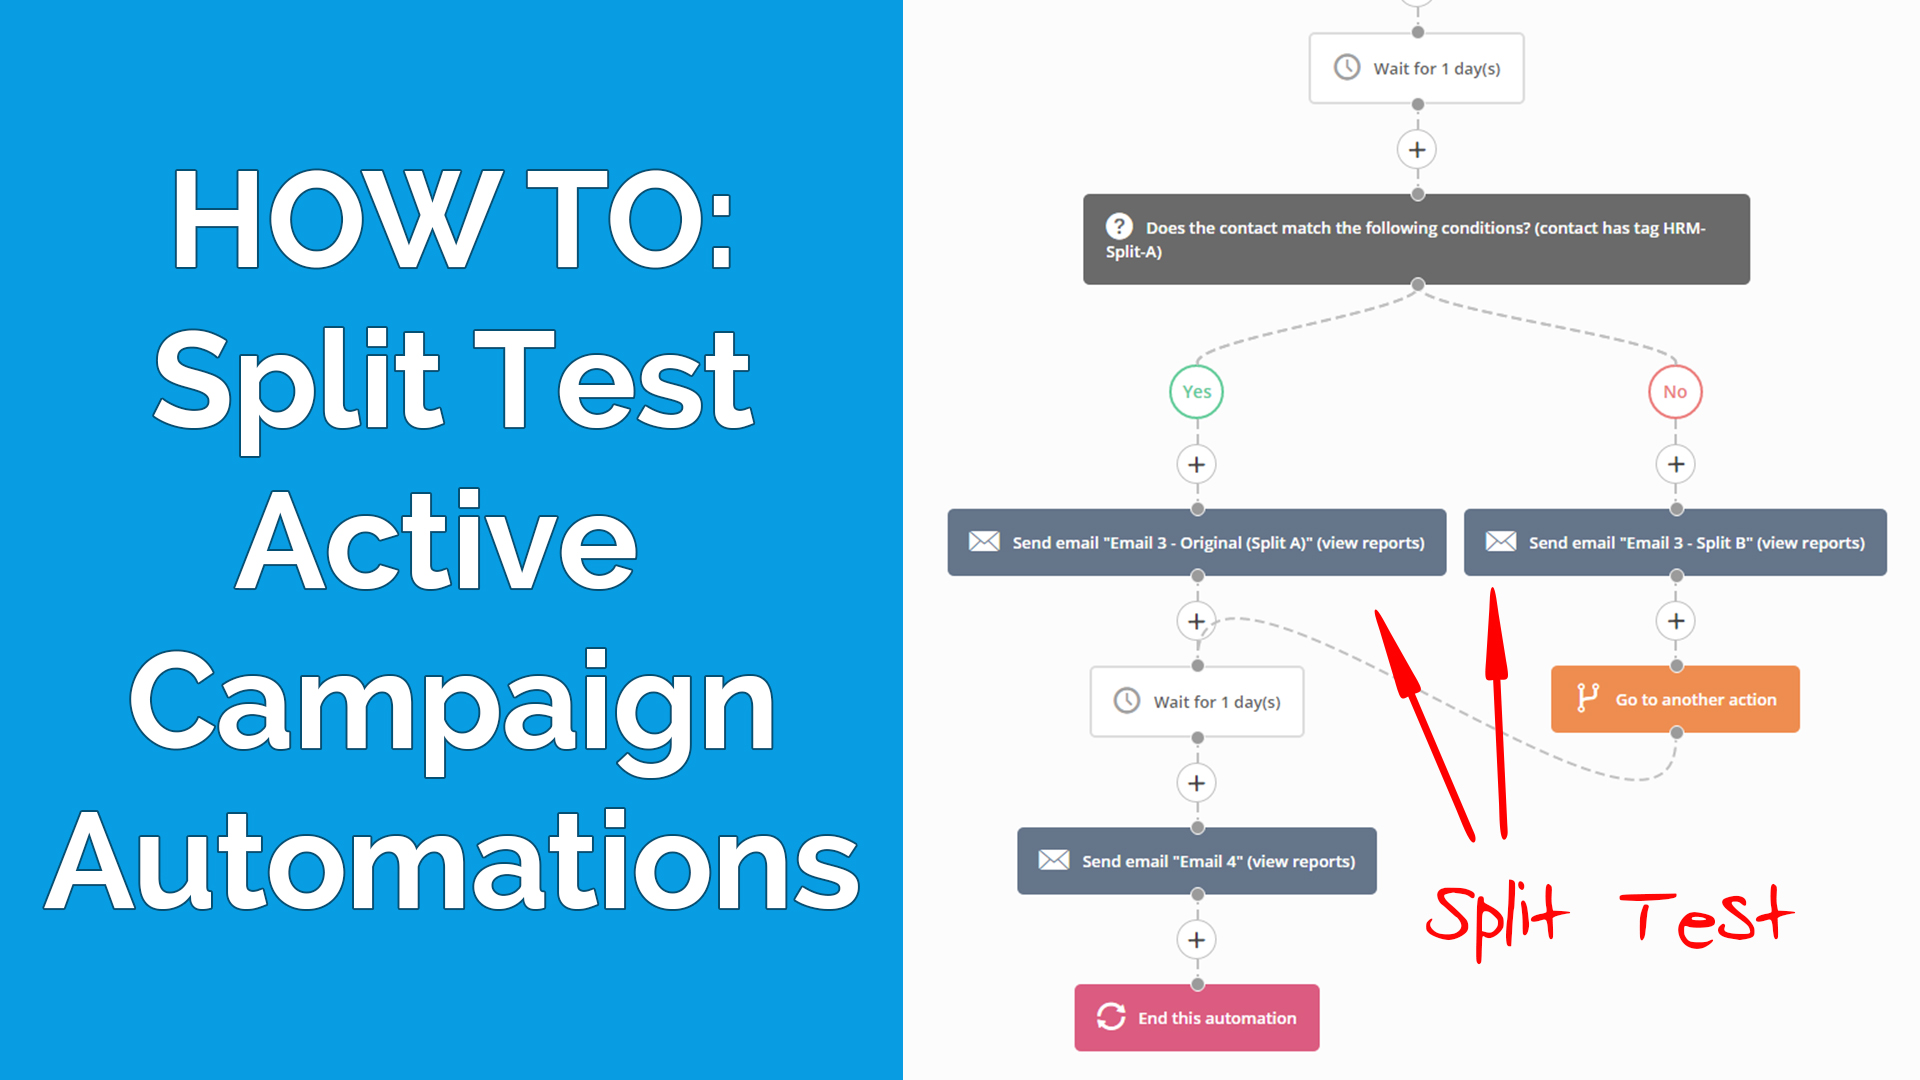 Split Test Active Campaign Automations in Just 2 Steps